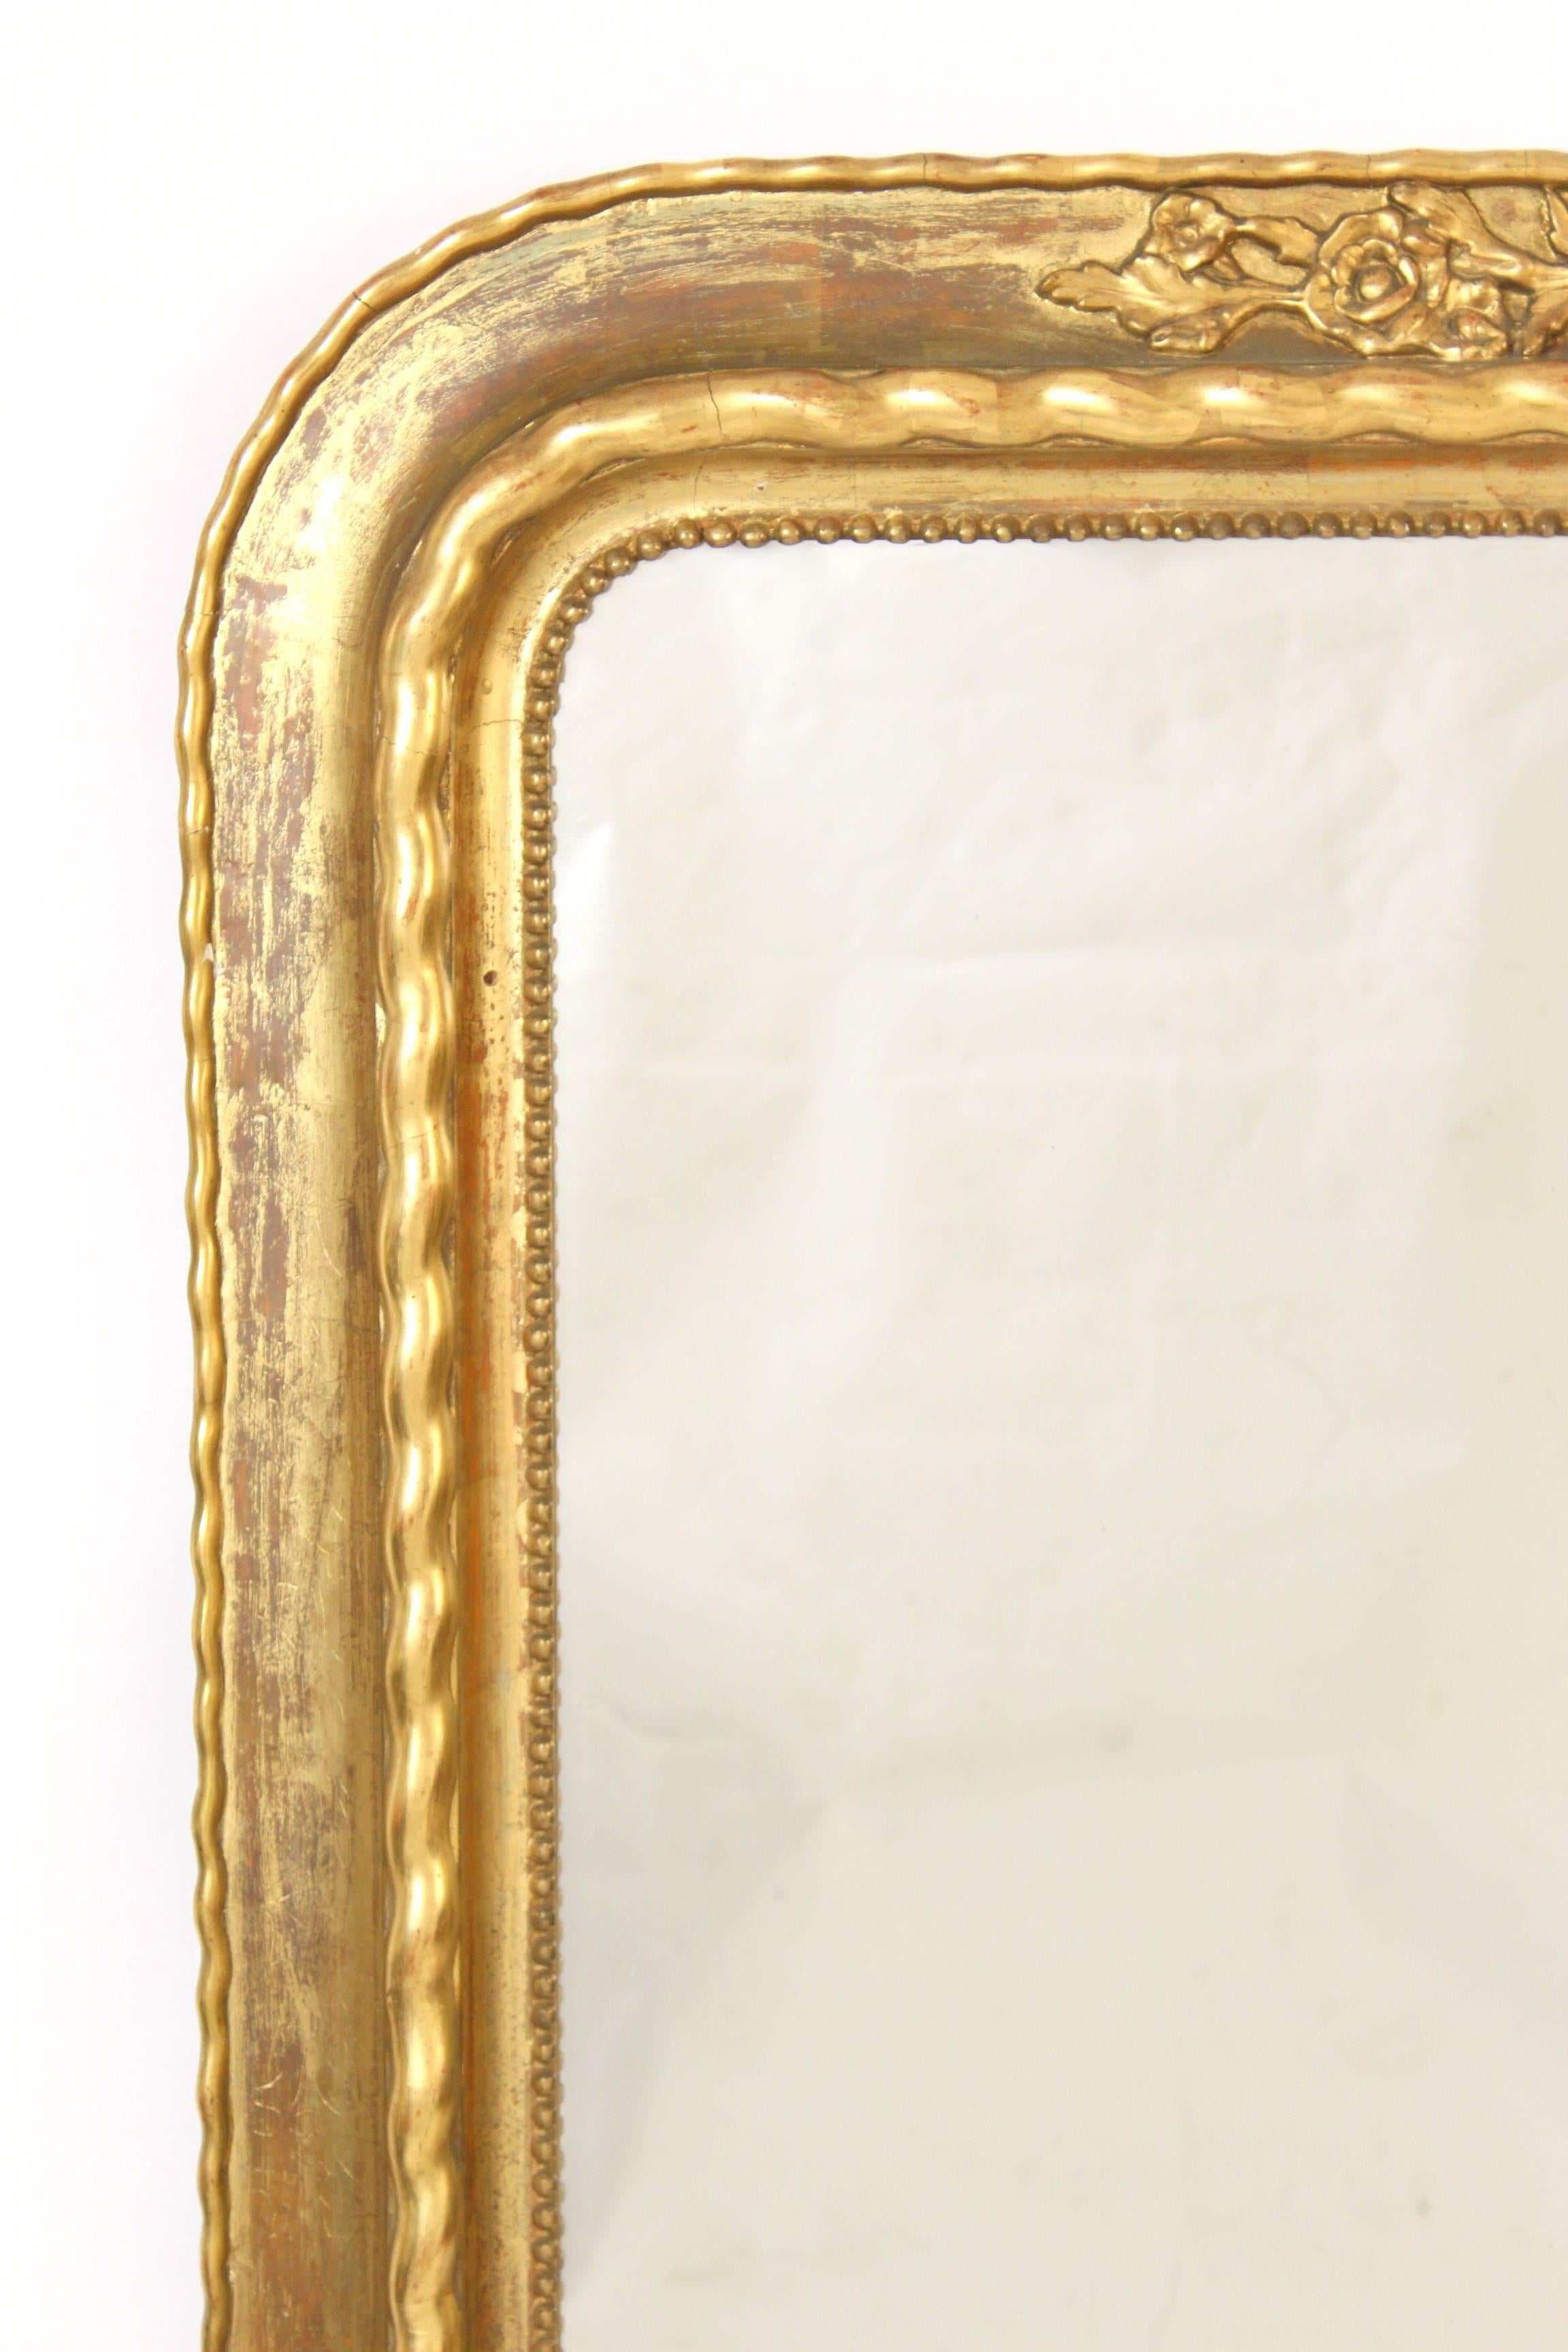 Large Napoleon III style gilt wood mirror, late 19th century. Areas of rubbing on gilding, sizing showing.